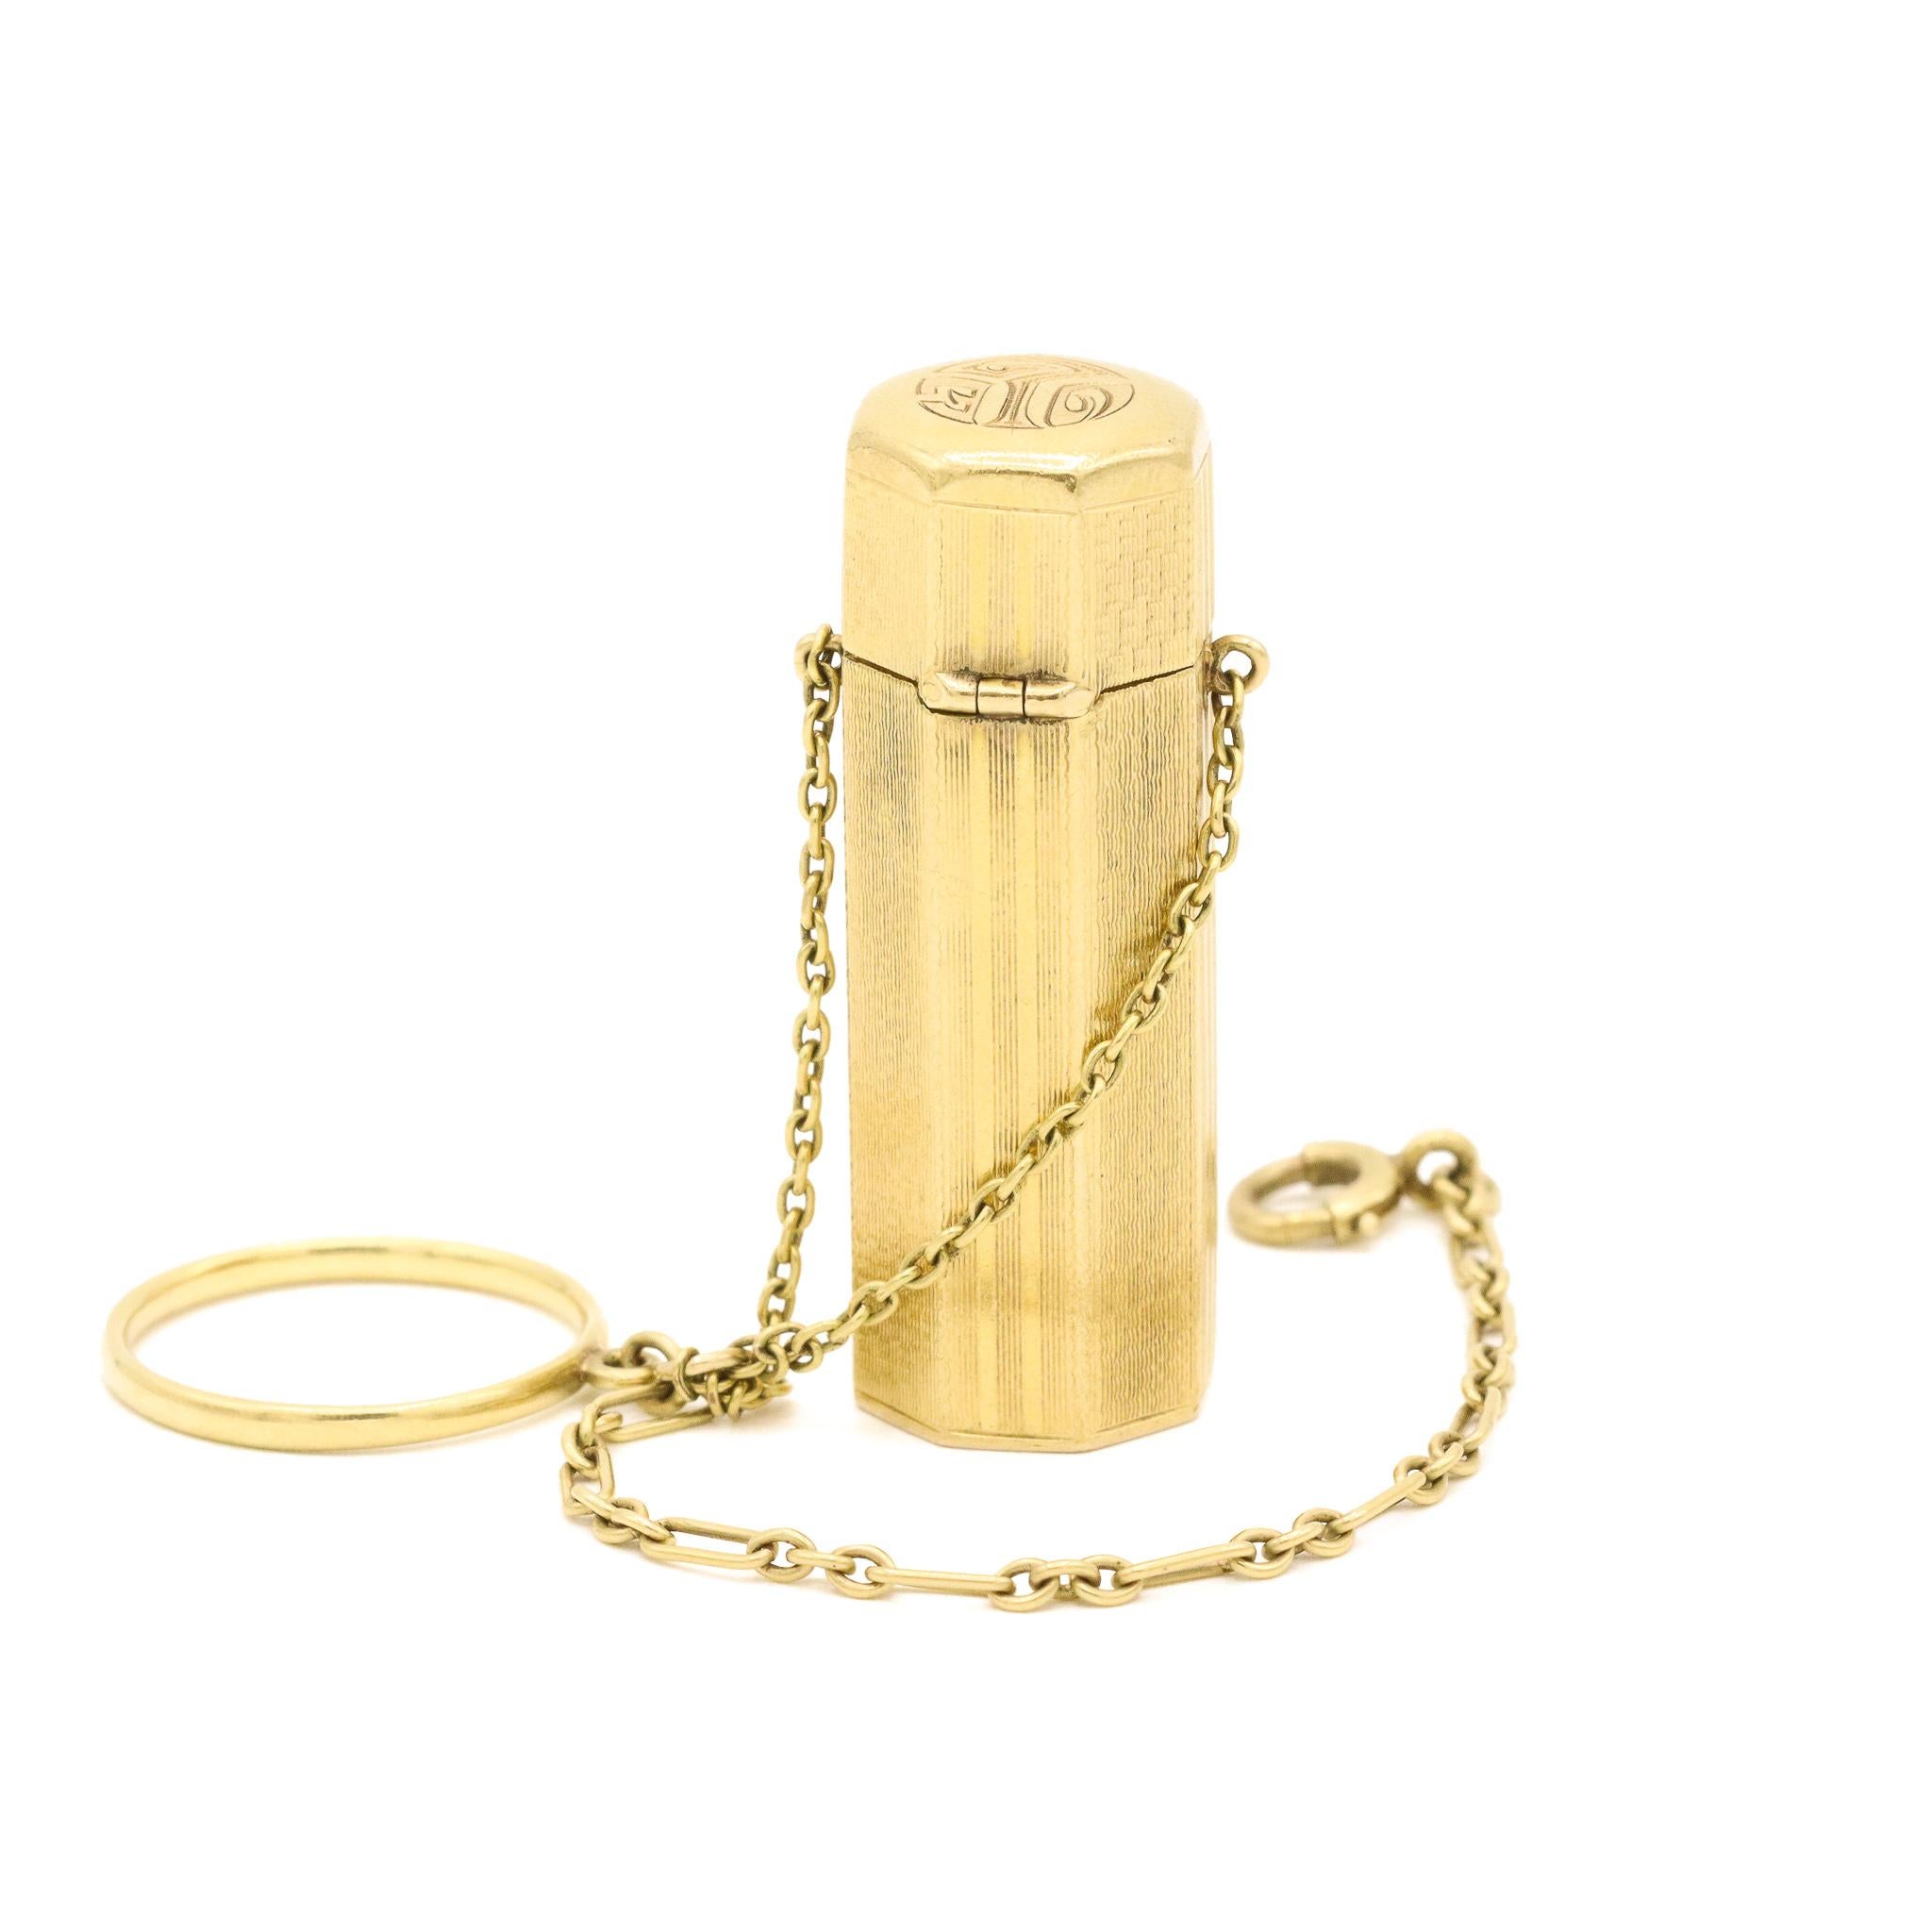 One lady's hand made 10K yellow gold, antique lipstick case . The lipstick case measures approximately 1.50 inches in length by 13.61mm tapering to 13.50mm in width and weighs a total of 15.20 grams. Engraved with 